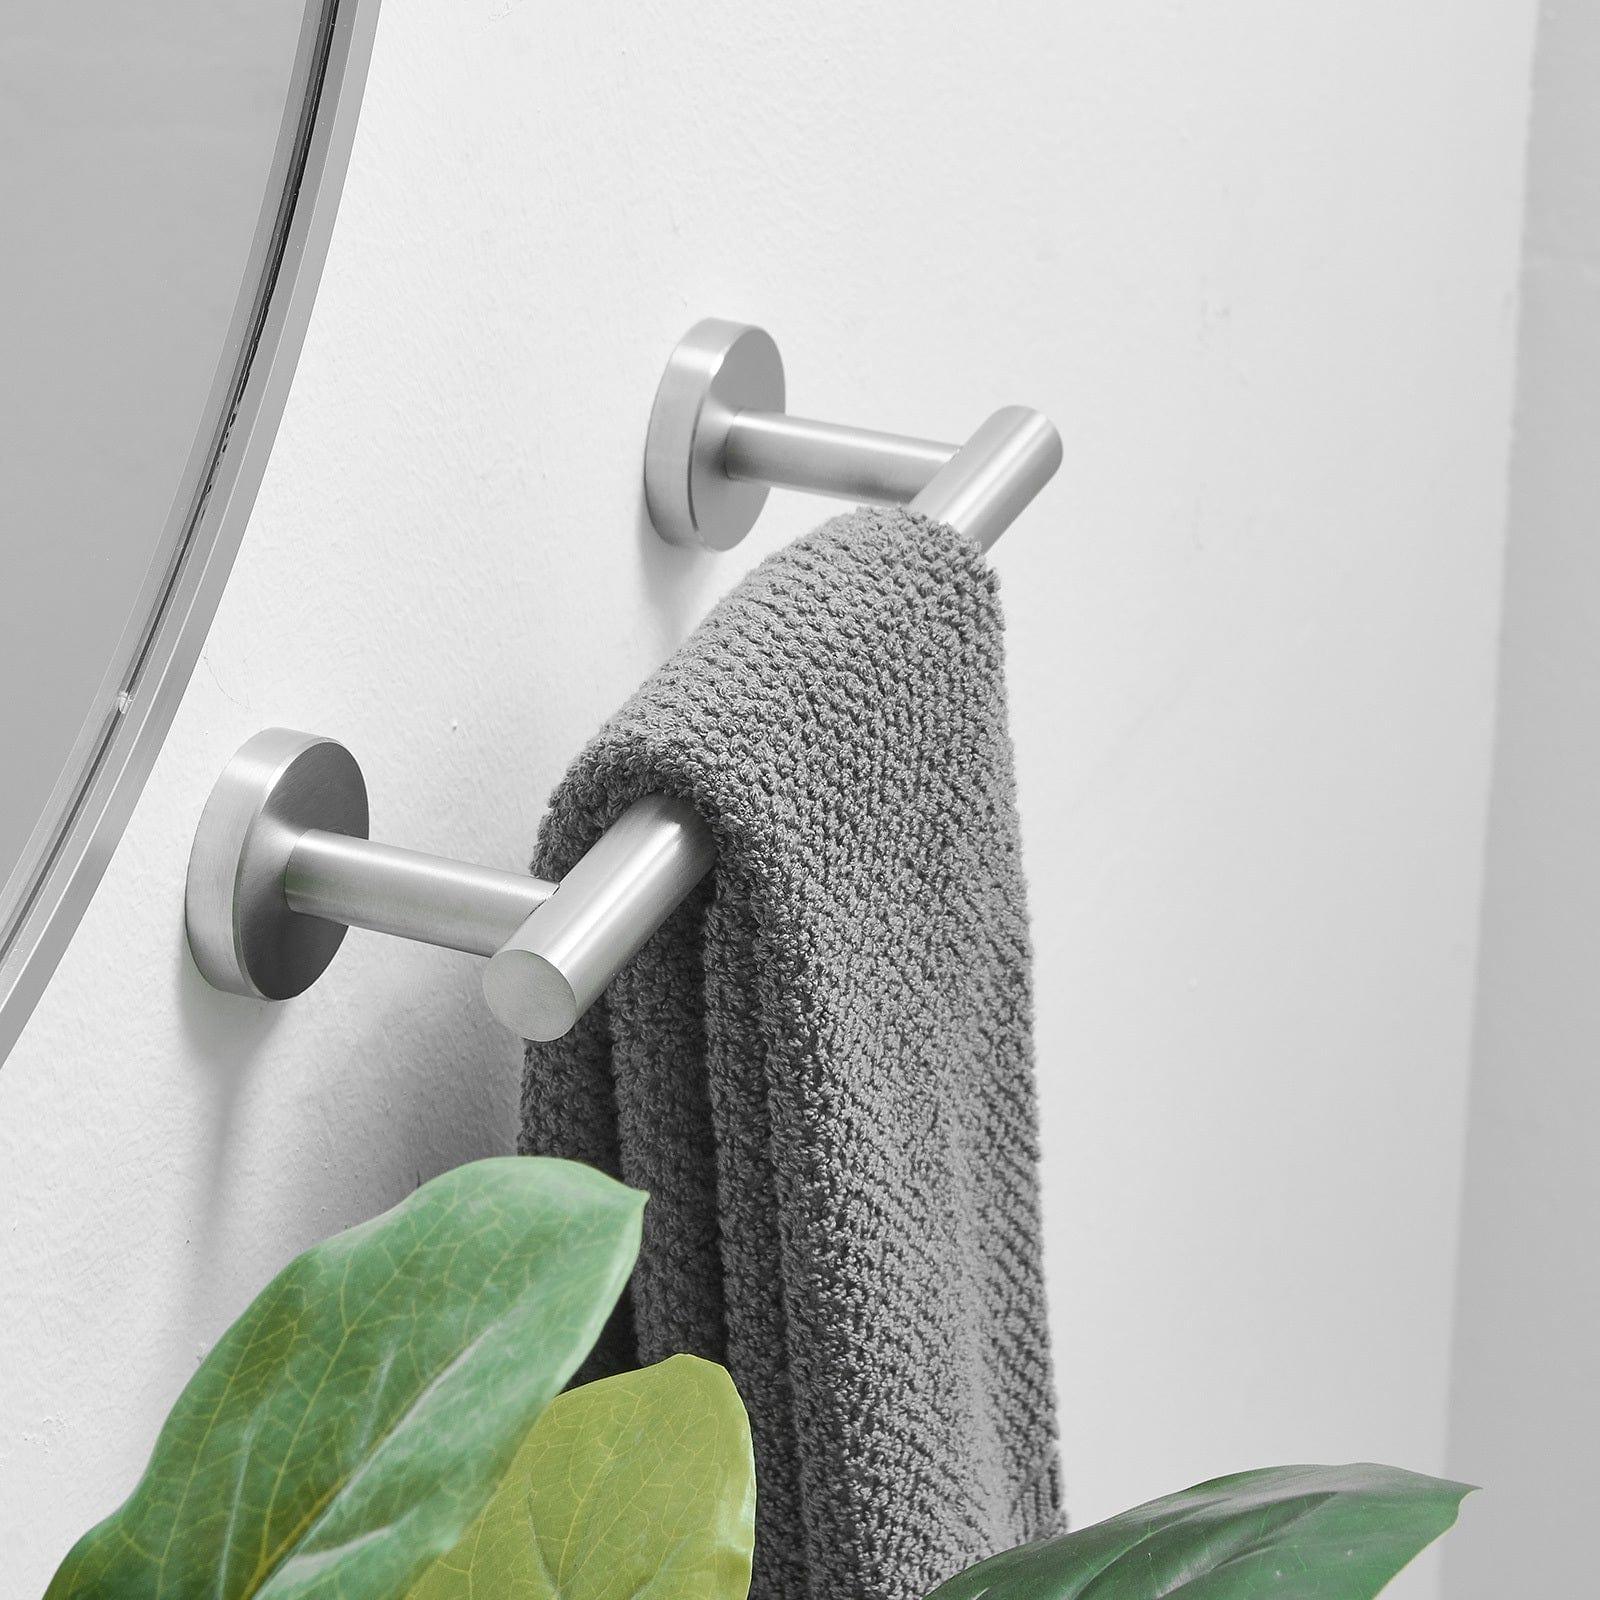 Shop Single Post Wall Mounted Towel Bar Toilet Paper Holder in Brushed Nickel Mademoiselle Home Decor